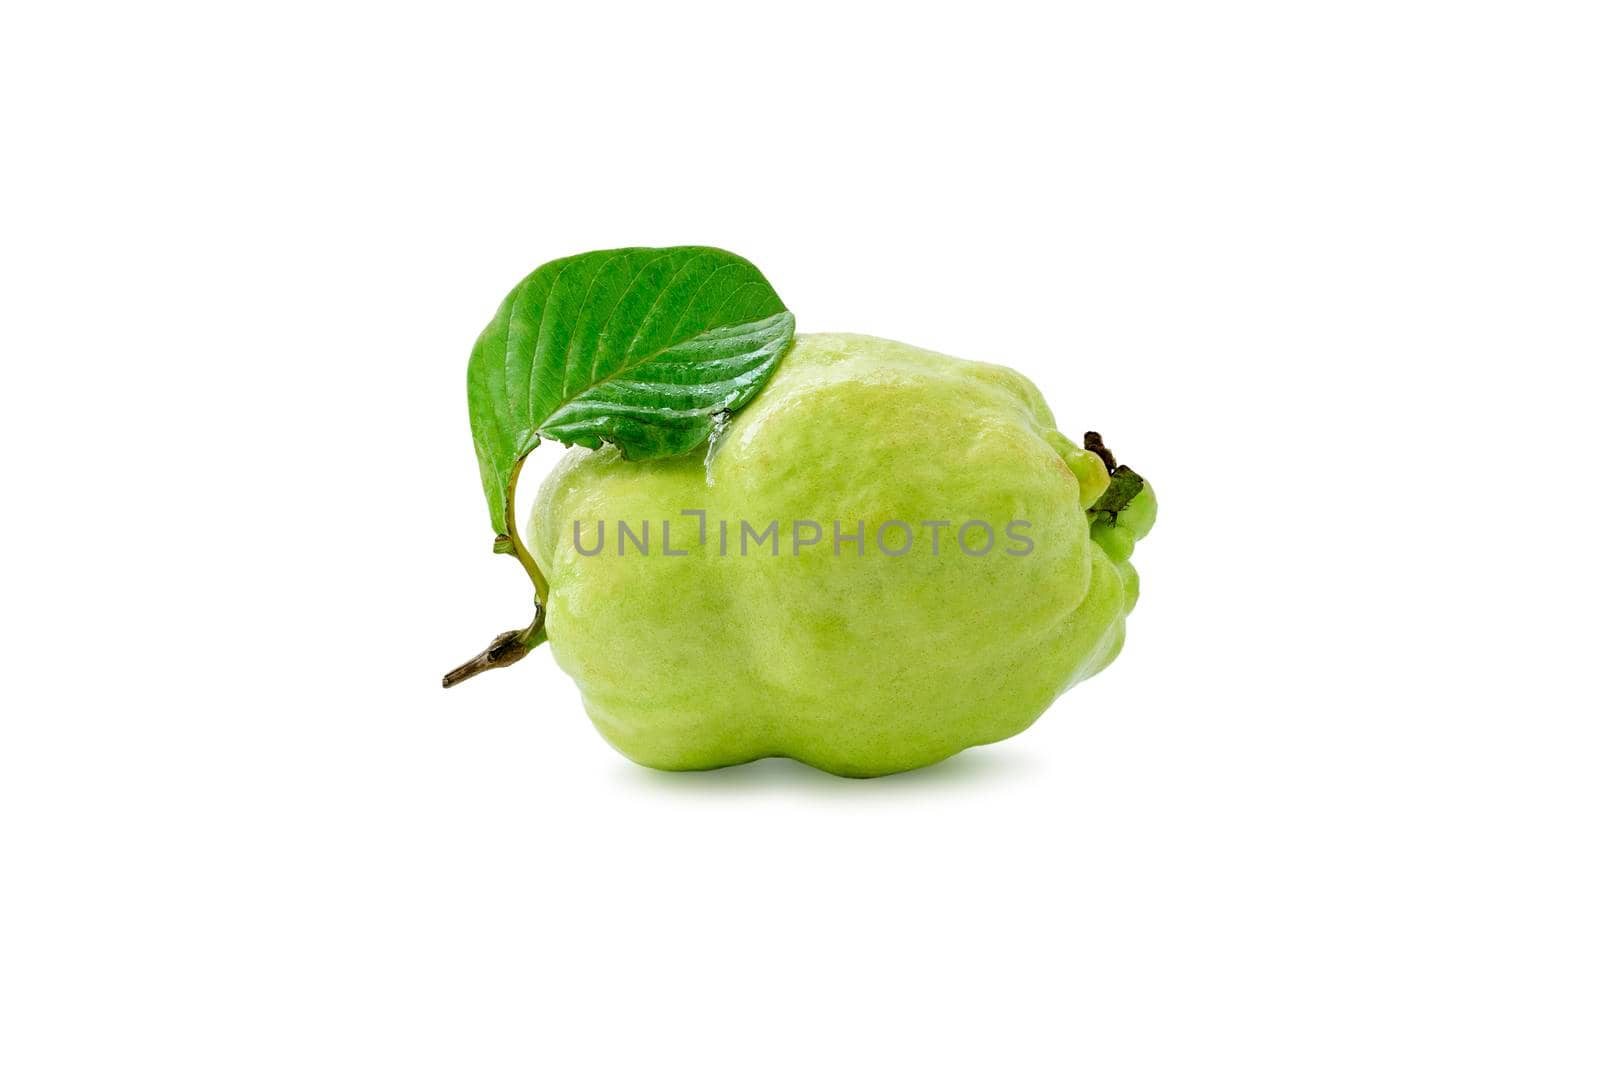 Single fresh guava with one leaf isolated on white background.